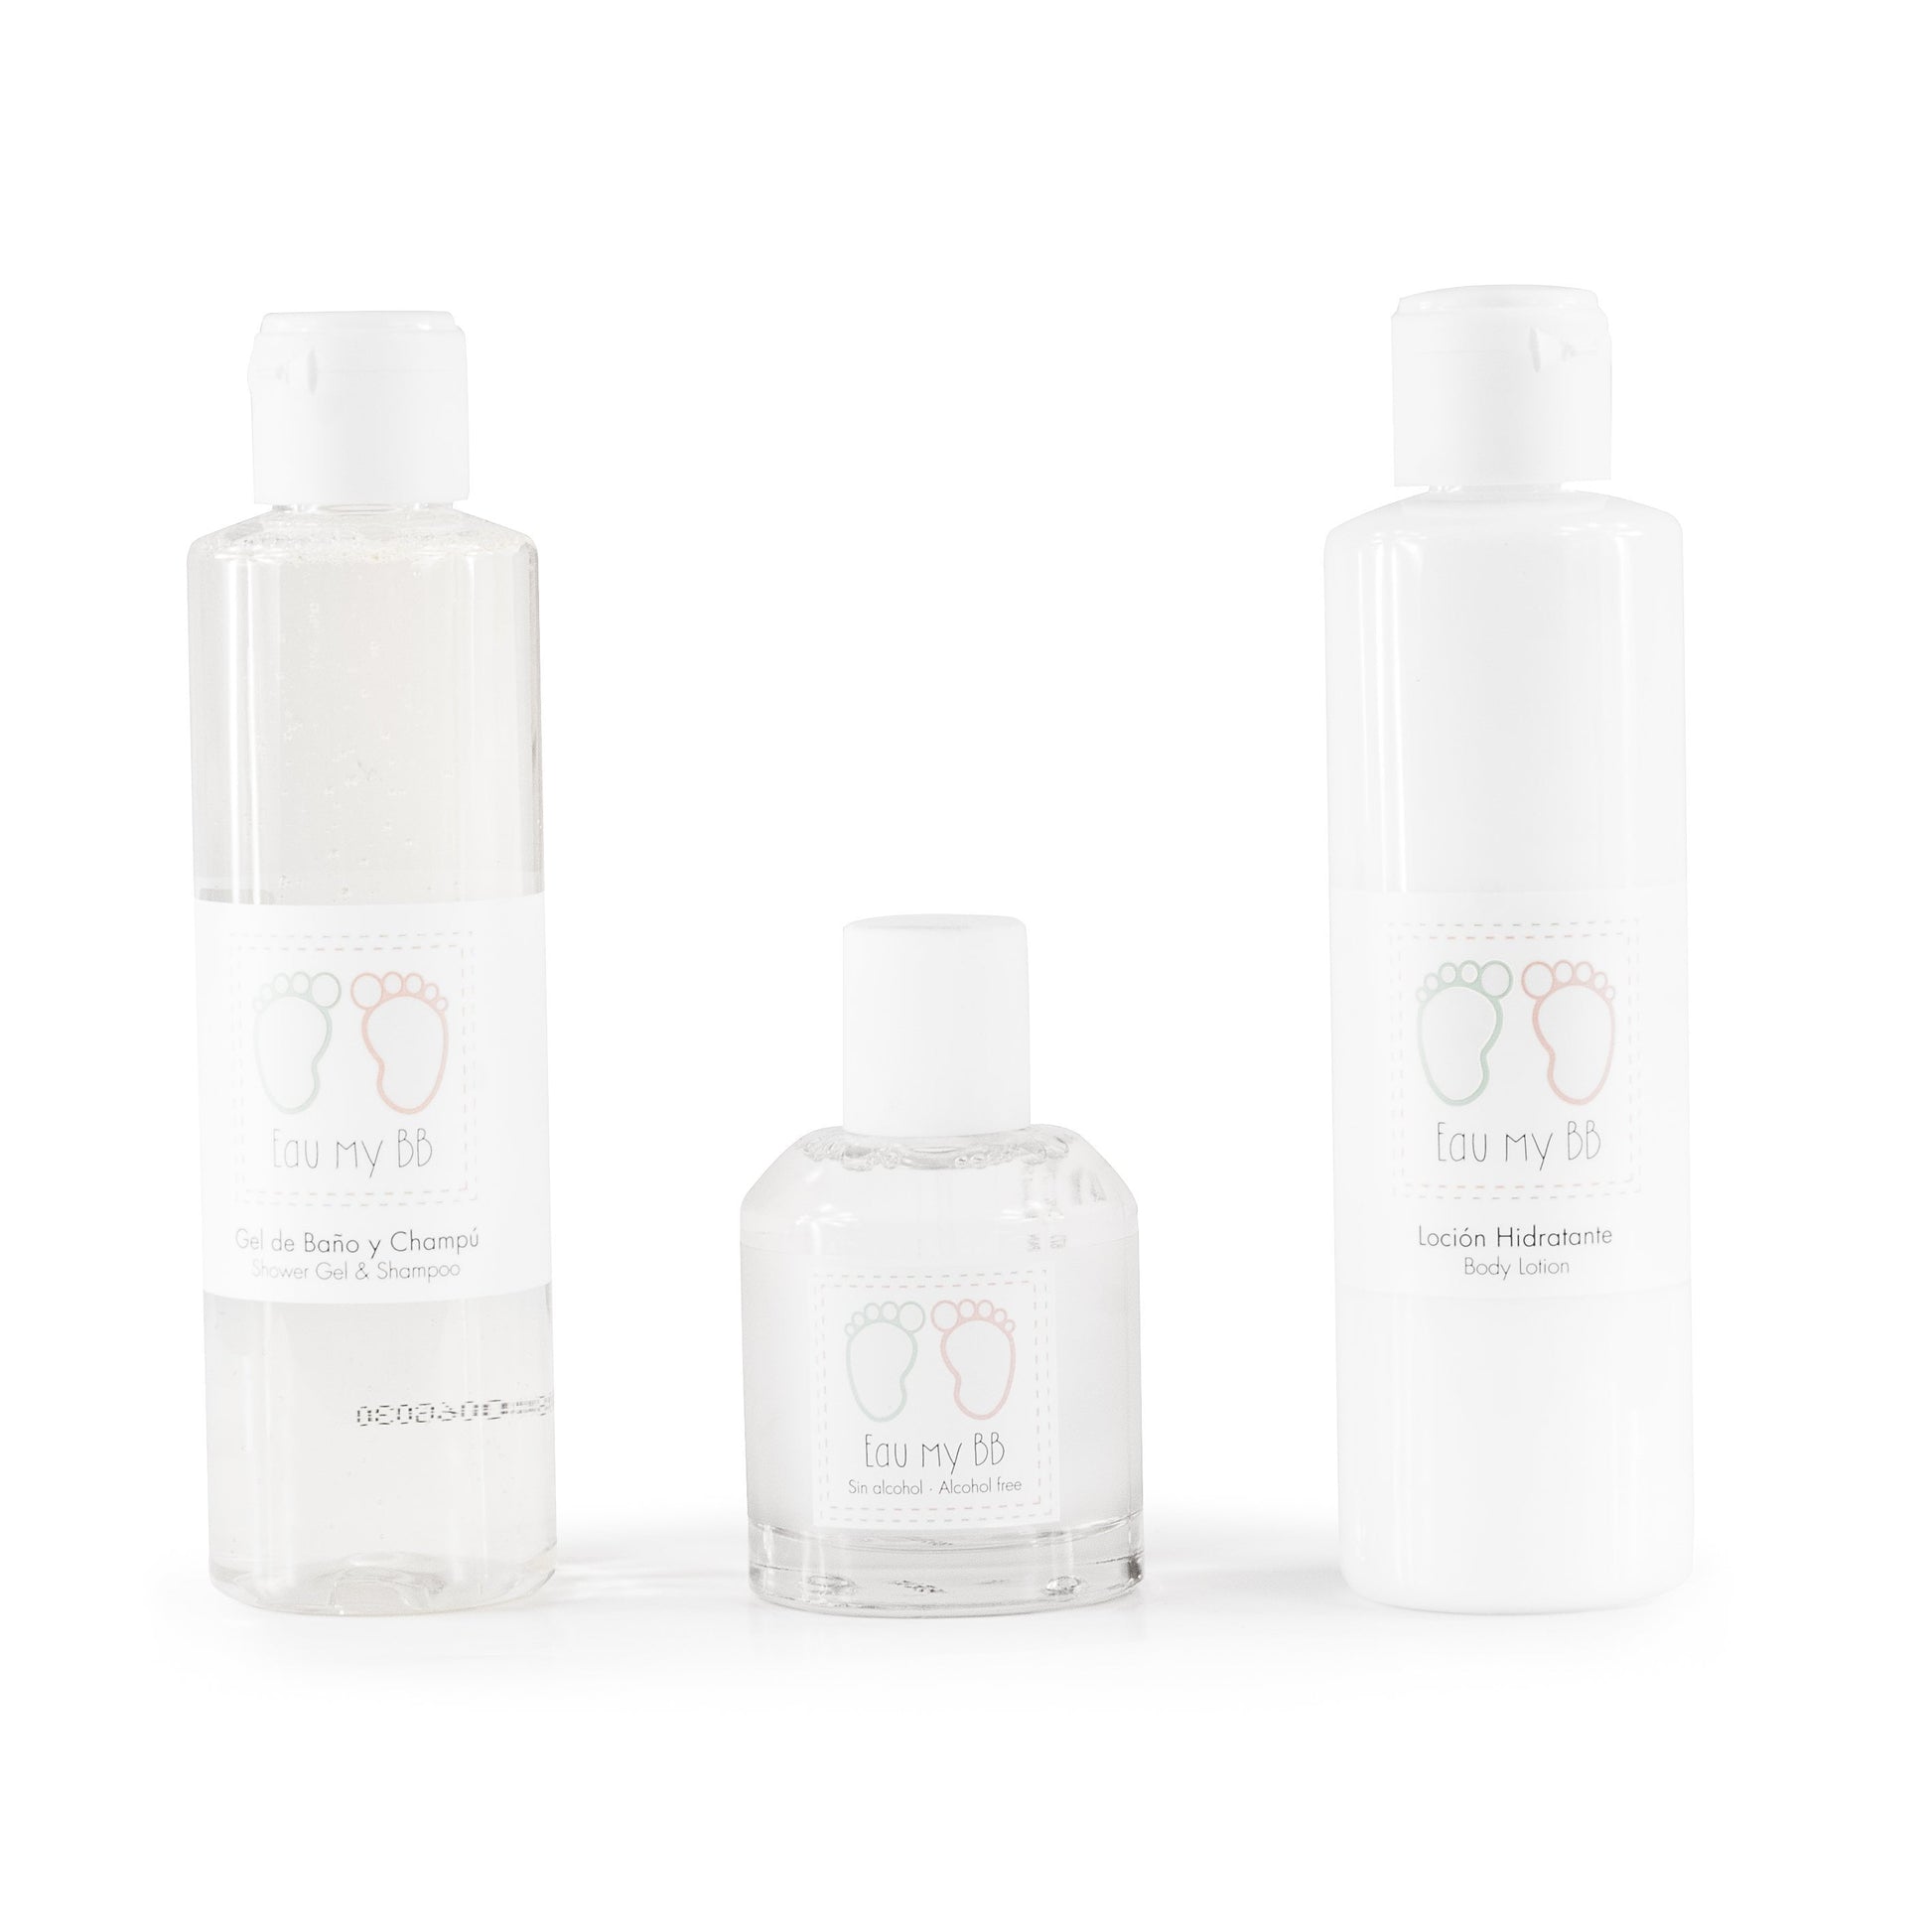 Eau my BB Gift Set for Girls 2.03 oz. Each Click to open in modal